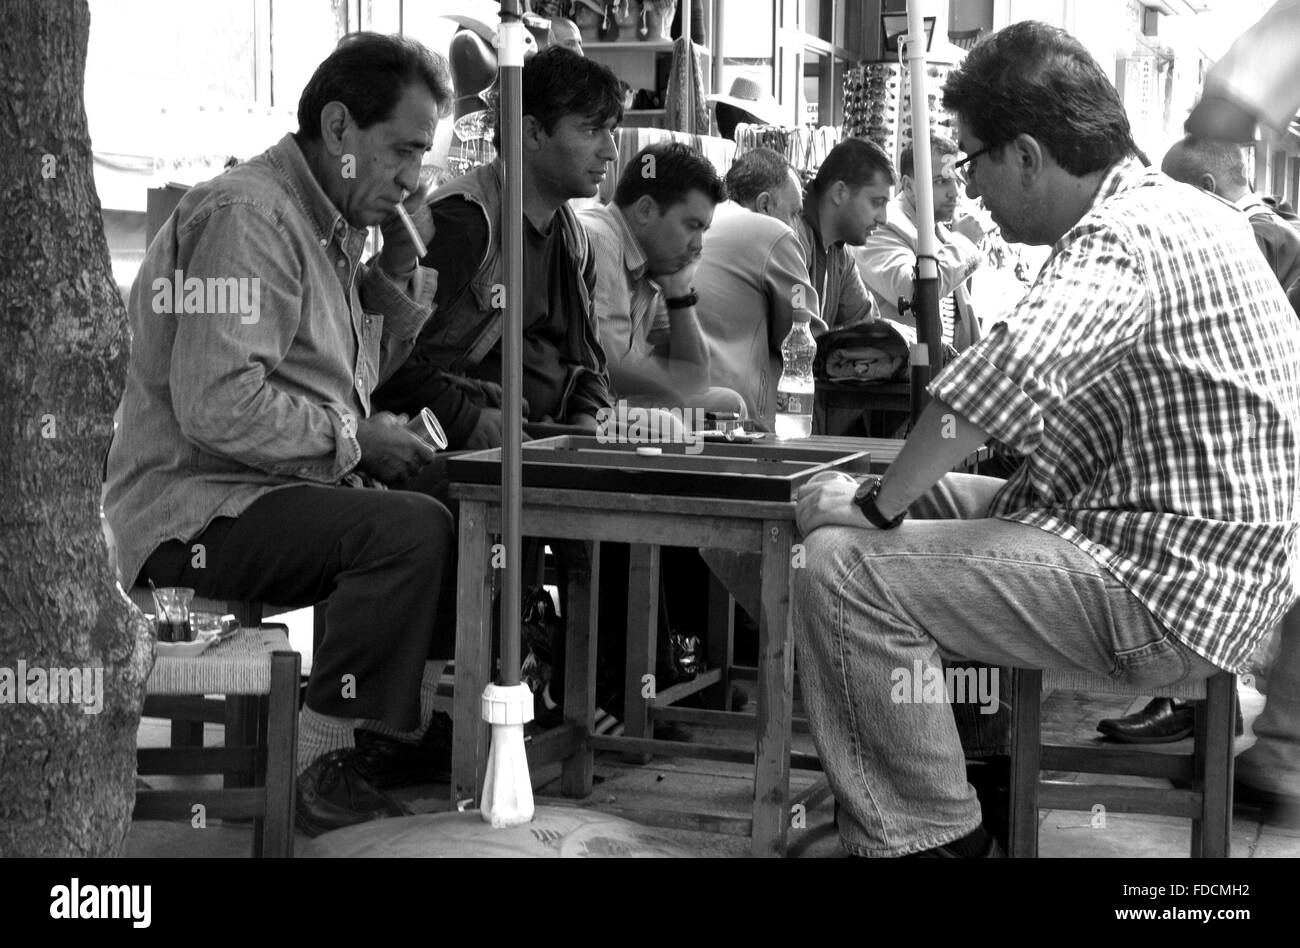 ISTANBUL - SEPT 8: Unidentified men play baccarat or tavla game in street at old quartier, Istanbul, Turkey on Sept 8, 2009 Stock Photo